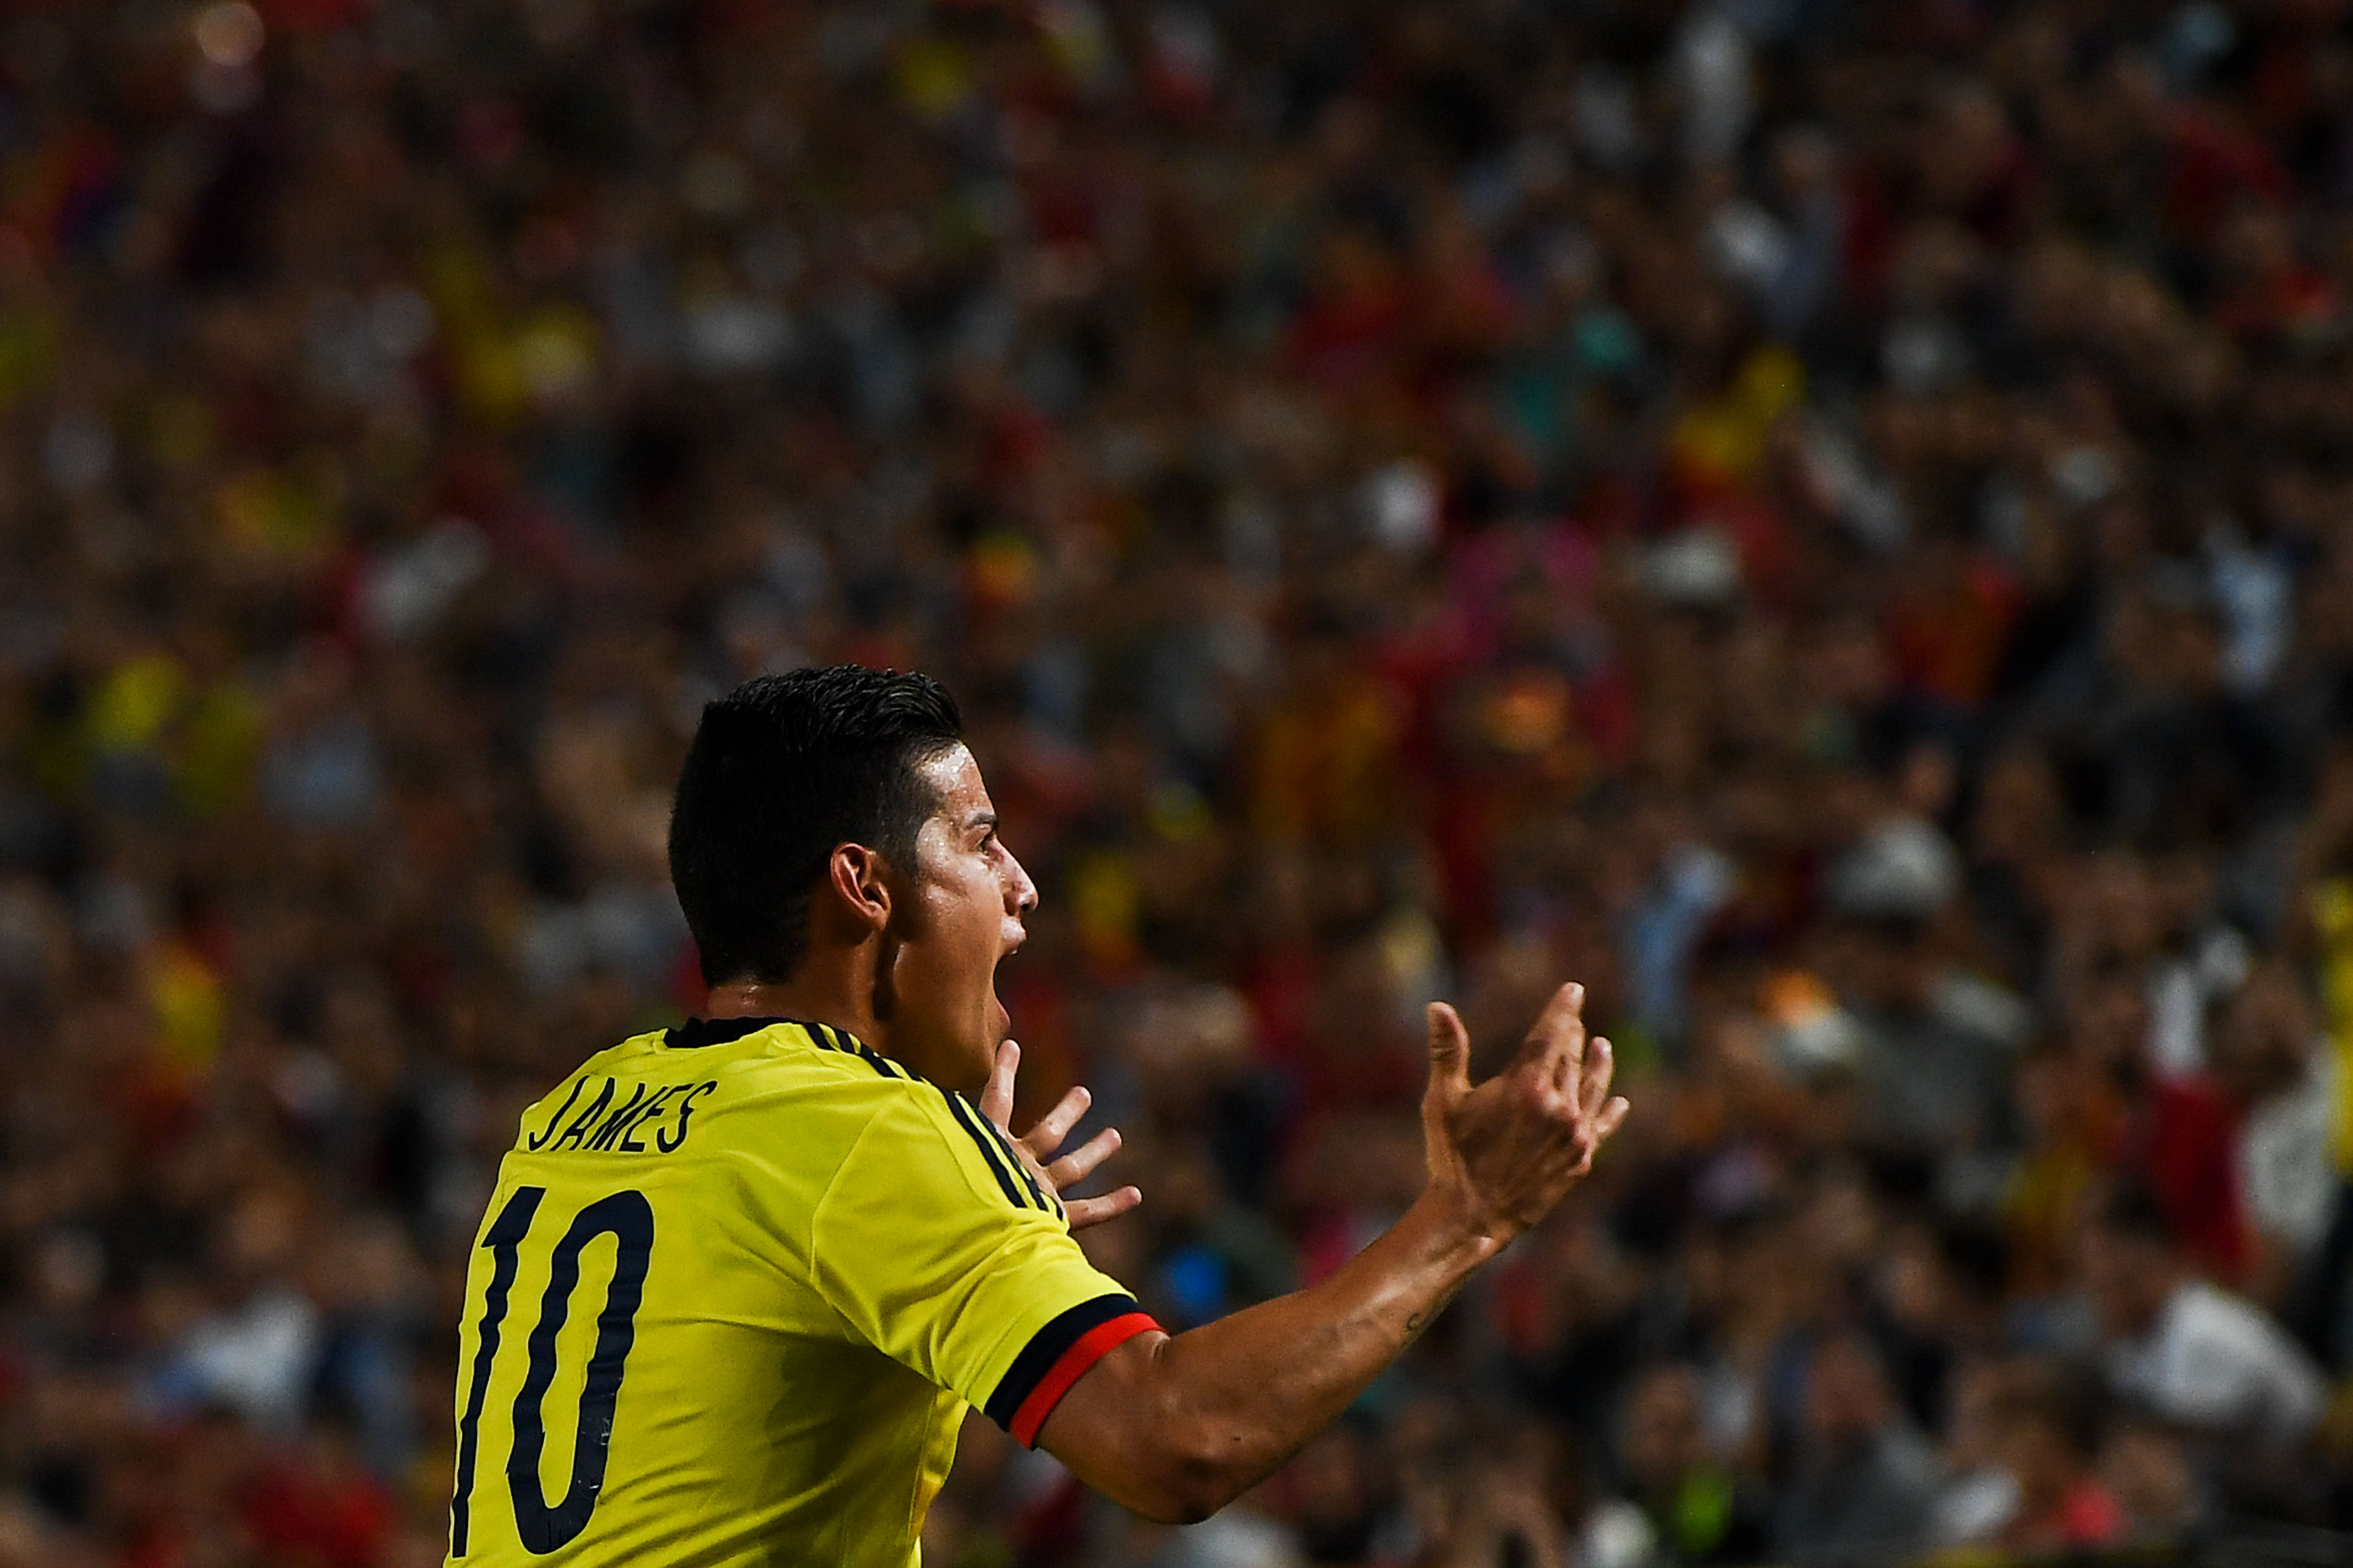 MURCIA, SPAIN - JUNE 07:  James Rodriguez reacts during a friendly match between Spain and Colombia at La Nueva Condomina stadium on June 7, 2017 in Murcia, Spain.  (Photo by David Ramos/Getty Images)